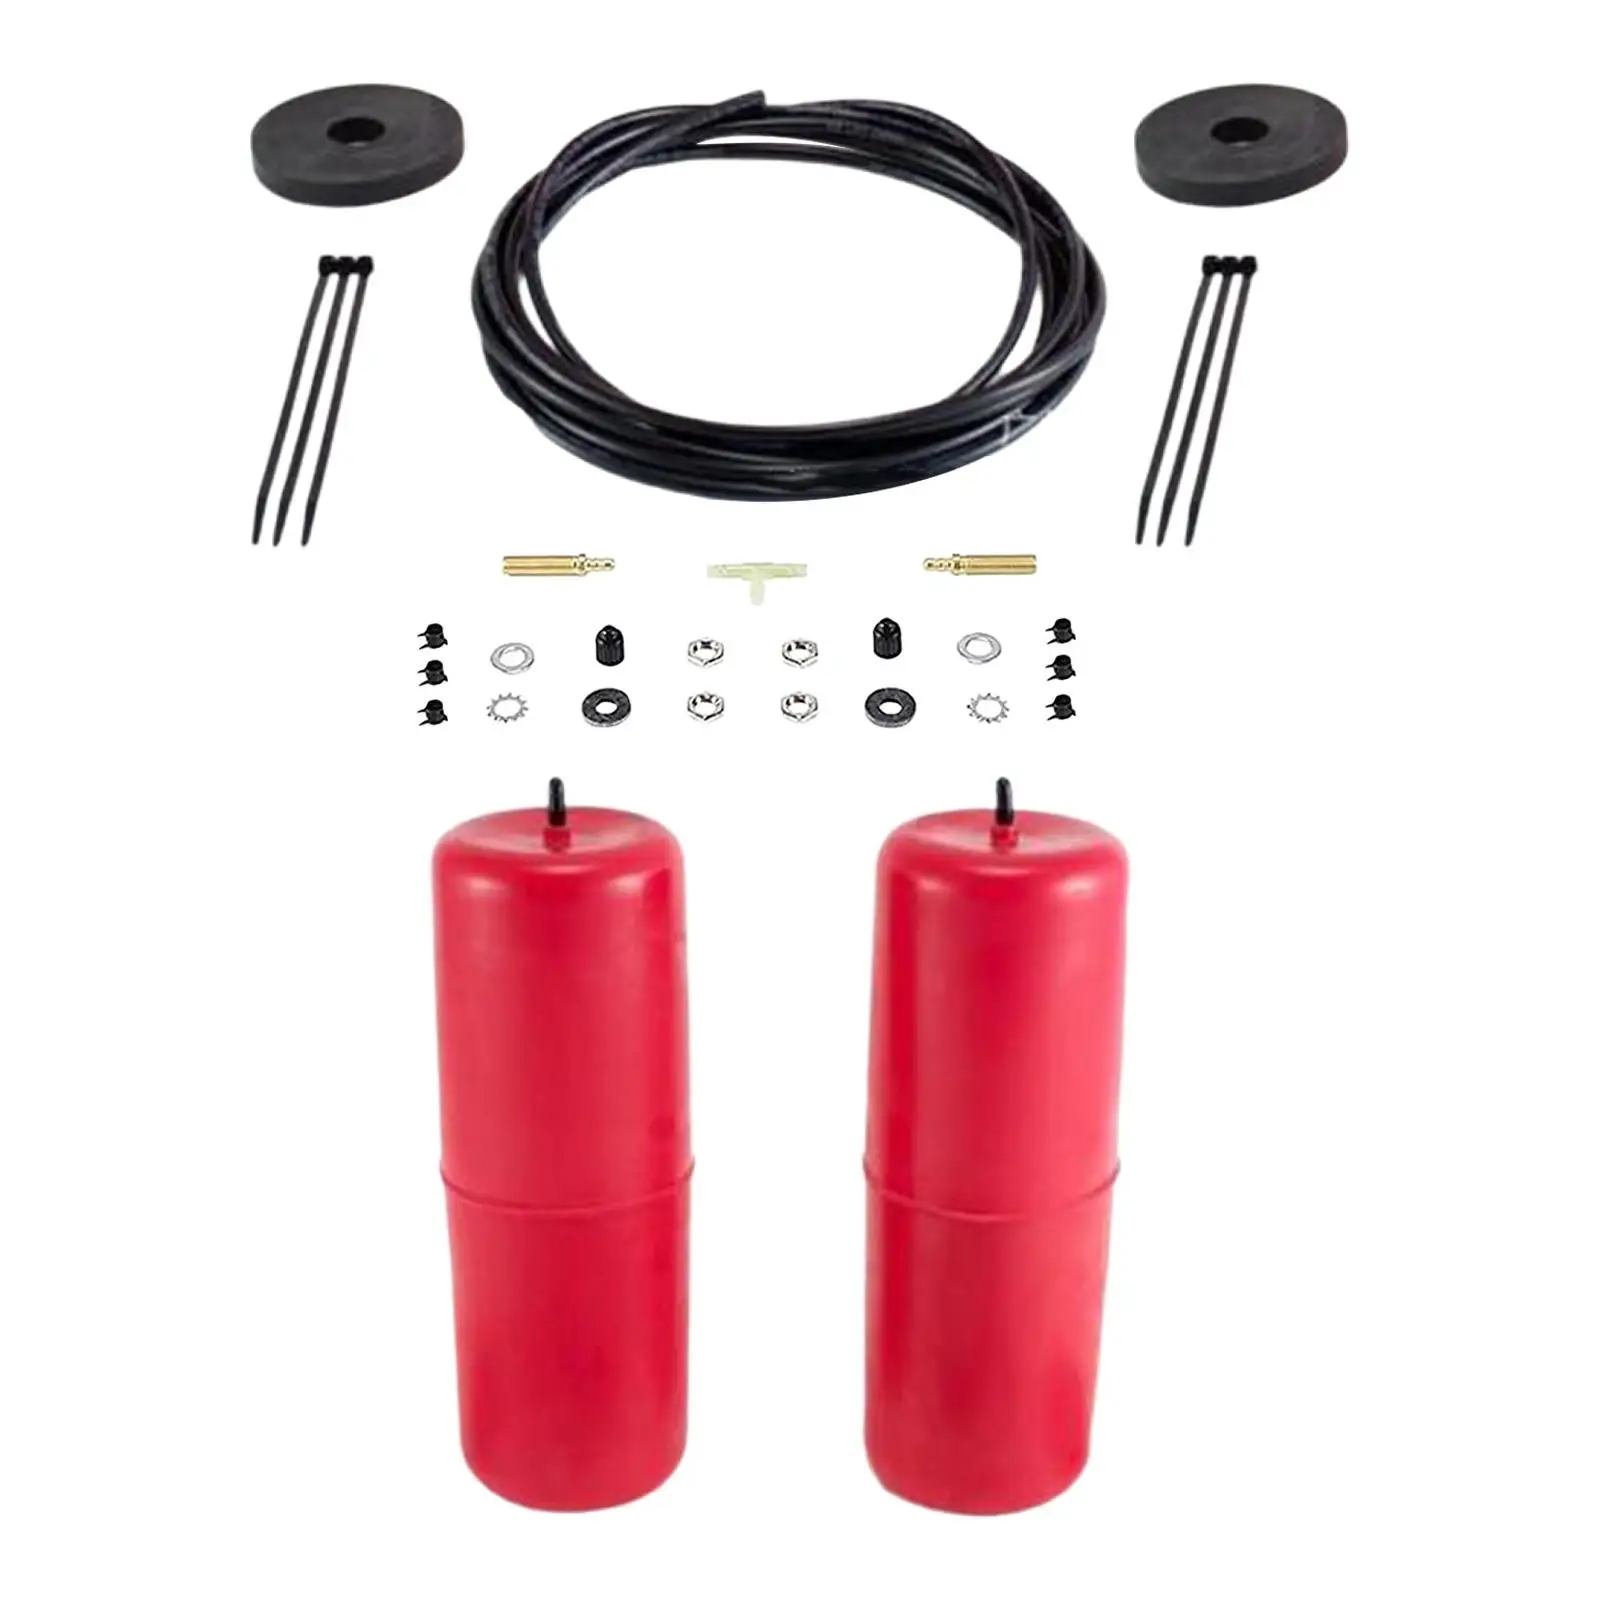 Air Suspension Kit 60818 Stable Performance Parts 1000lbs of Load Leveling Support Air Spring Kit for RAM 1500 Pickup